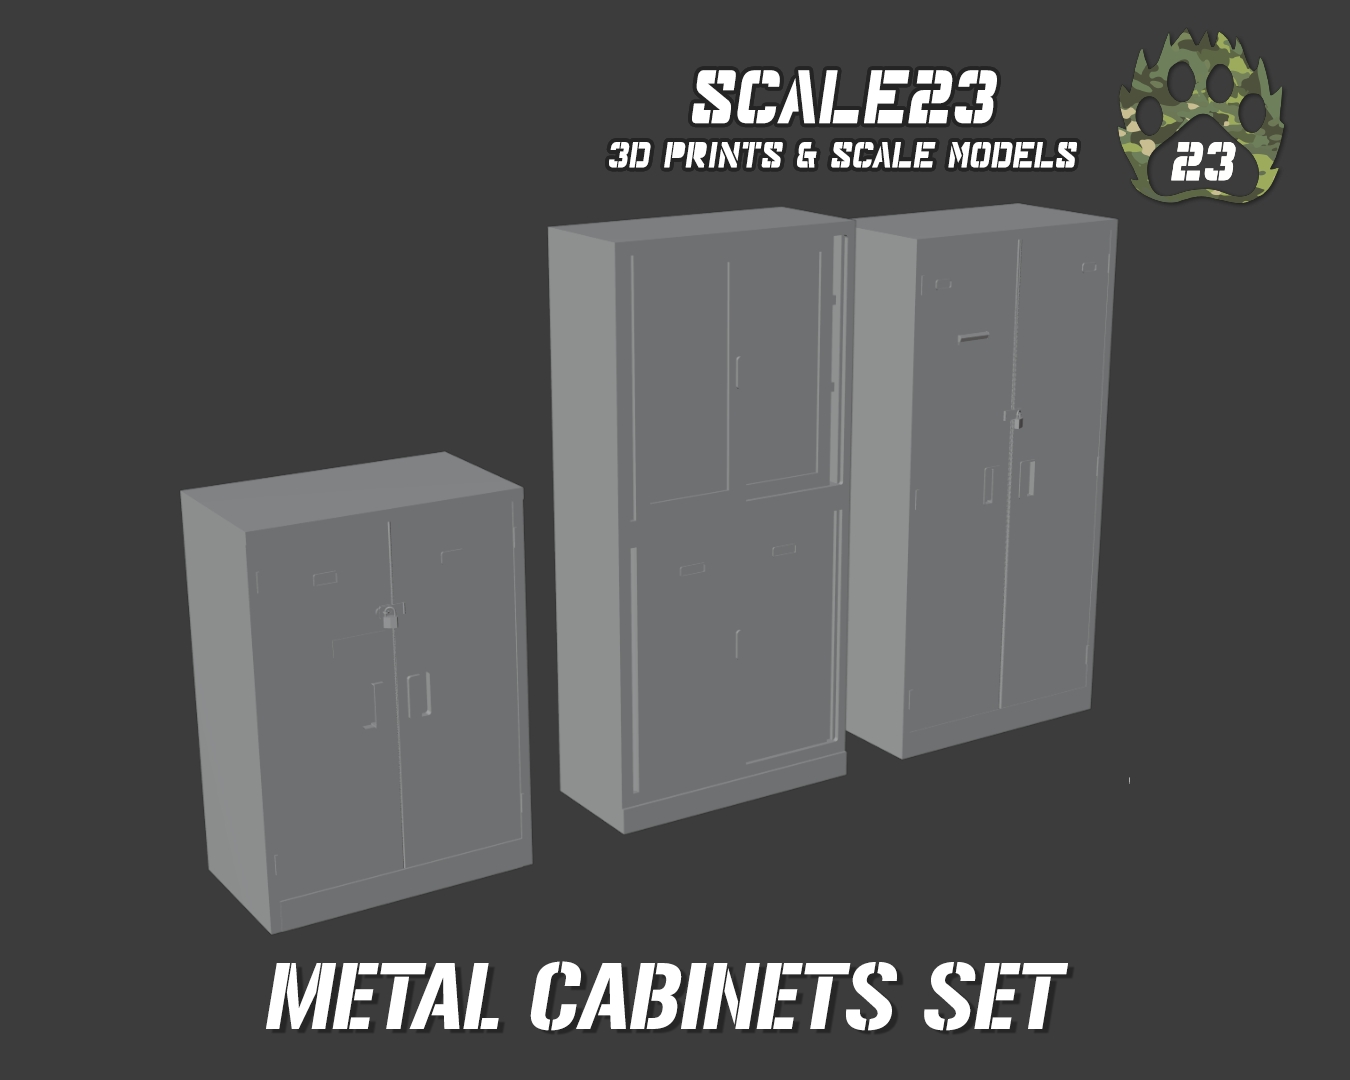 Metal cabinets (3pc)